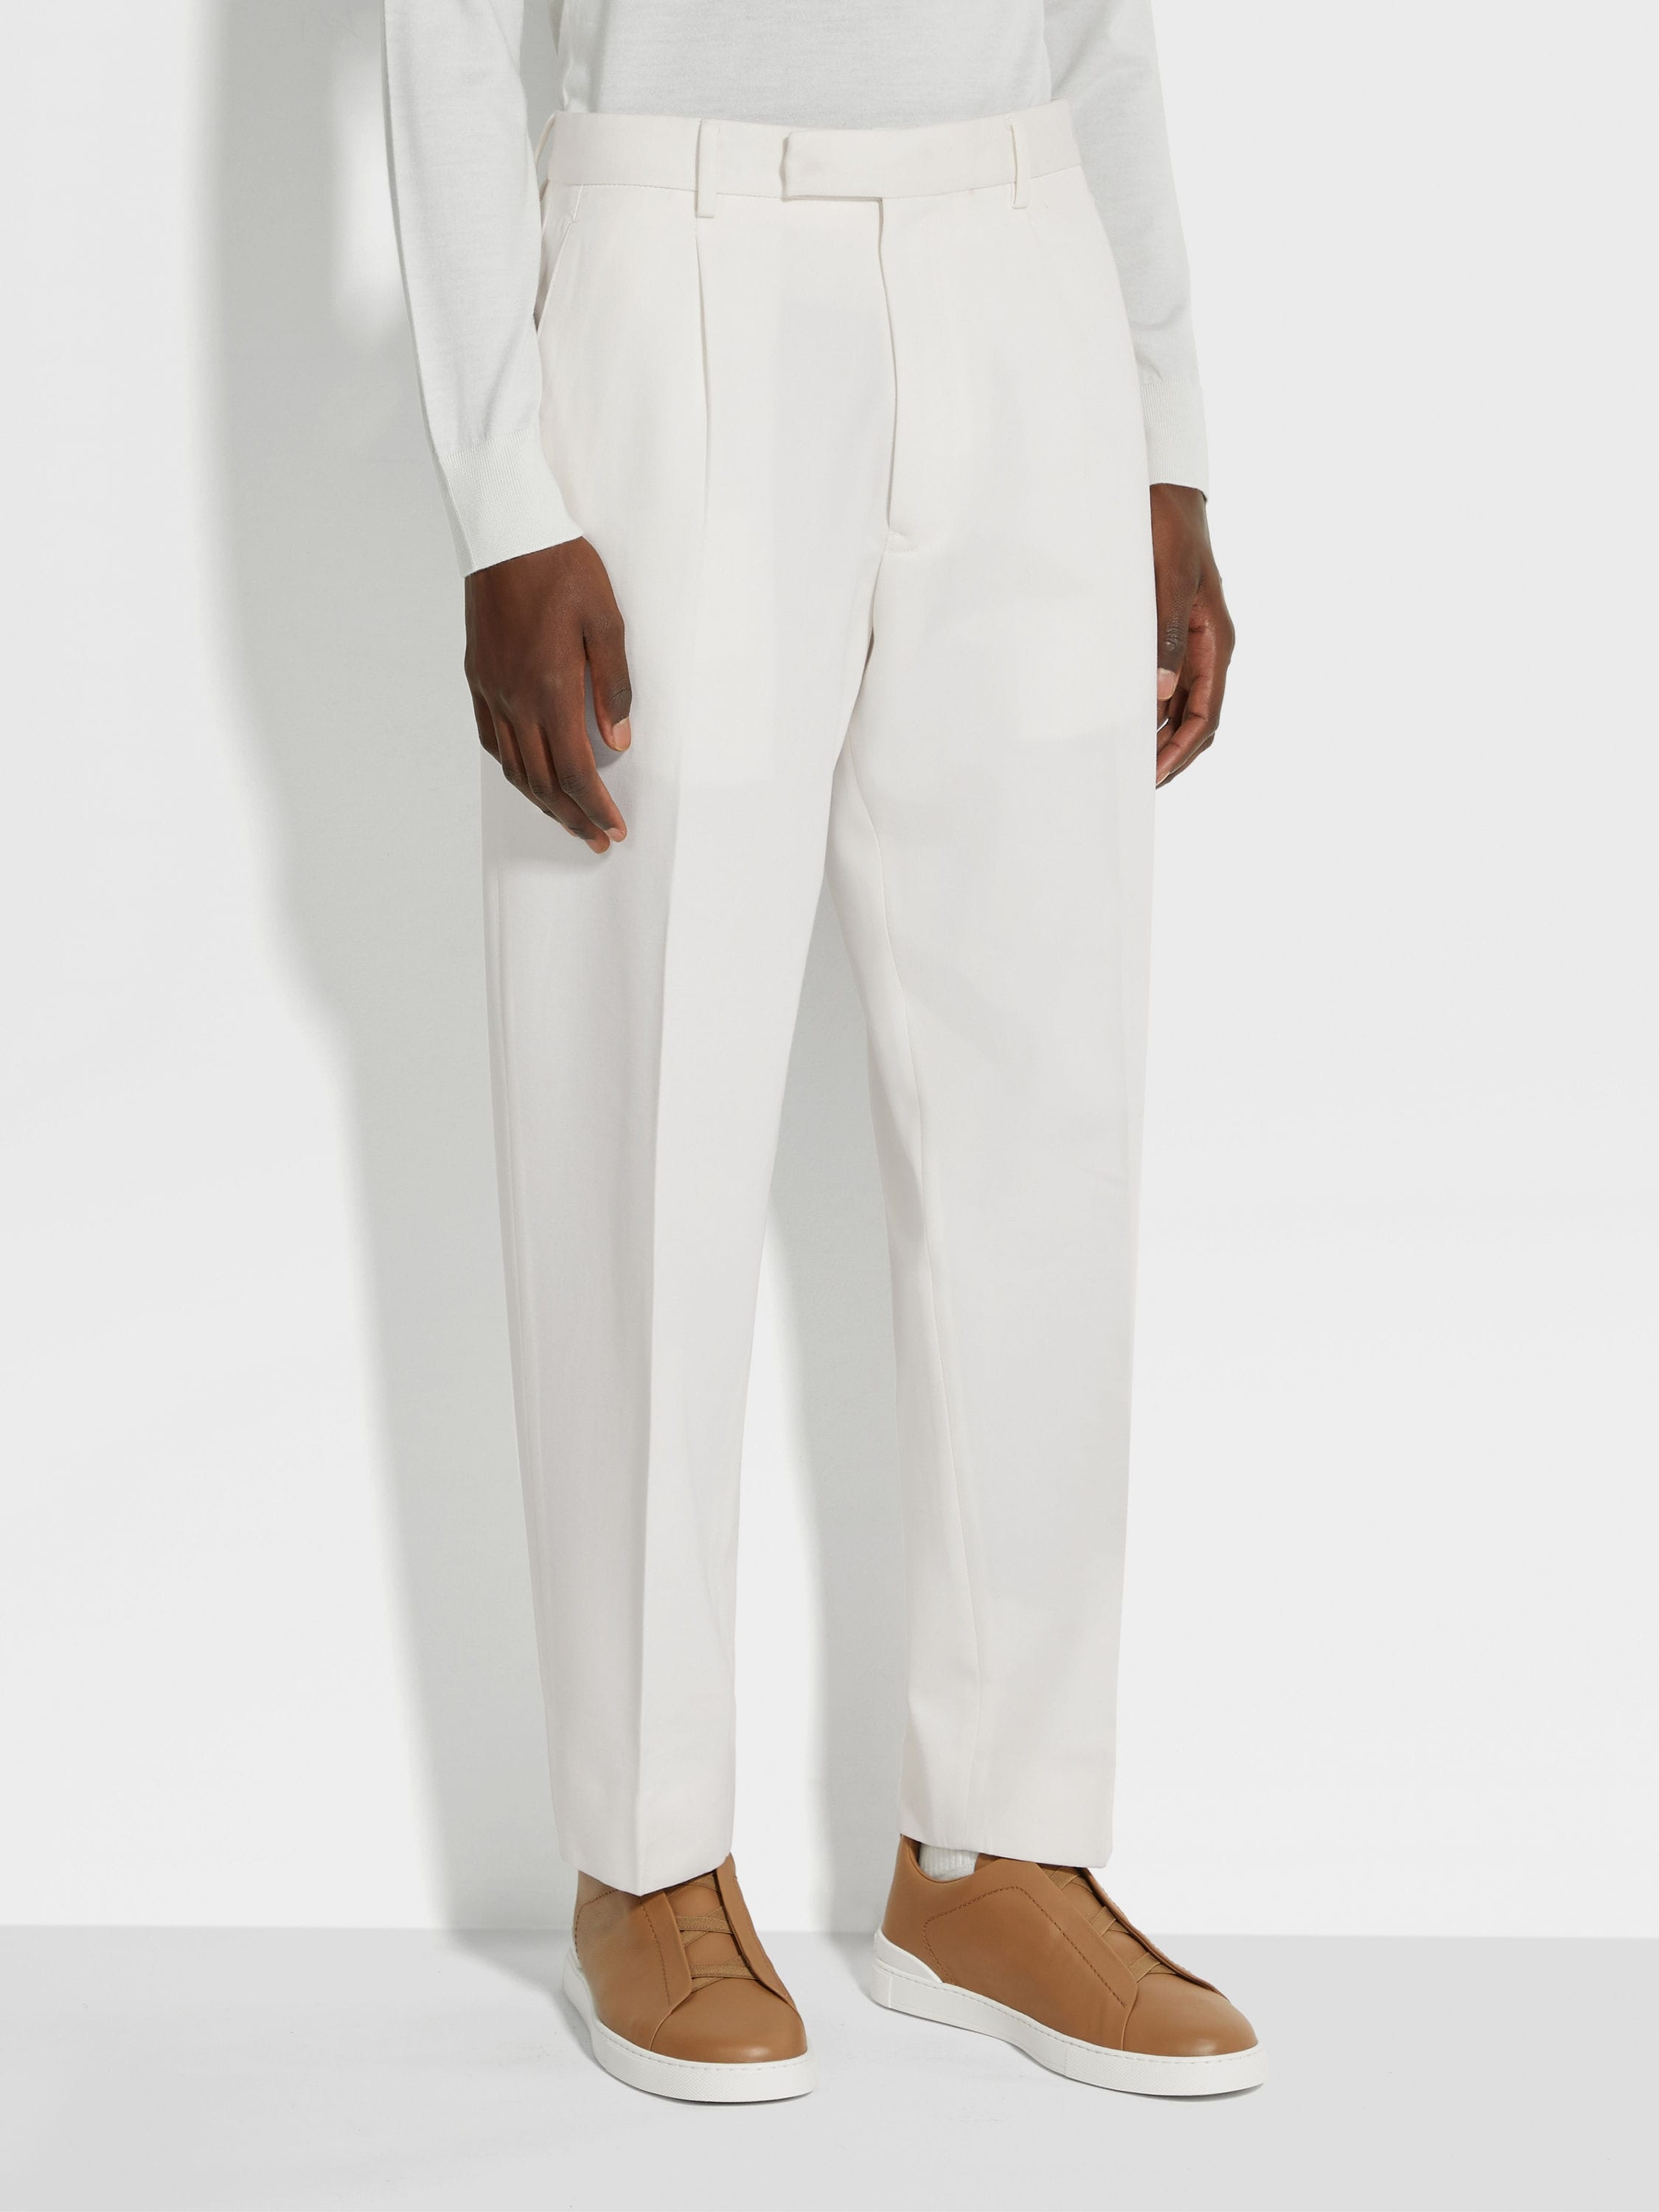 WHITE COTTON AND WOOL PANTS - 5